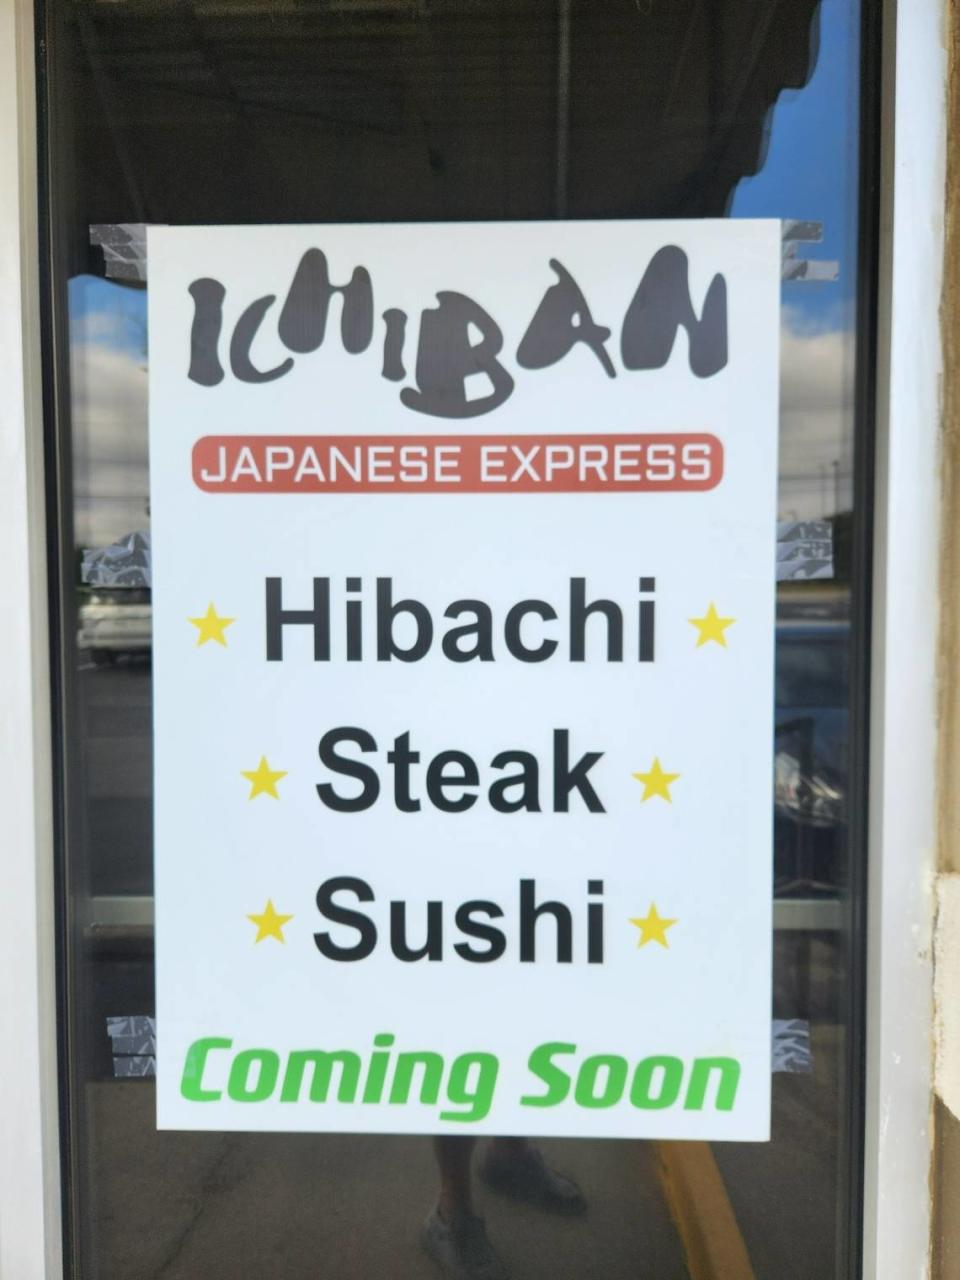 The restaurant formerly known as Taipo Ramen House at 5341 Sunset Blvd. in Lexington is now known as Ichiban Japanese Express and is focusing its entree menu on hibachi.